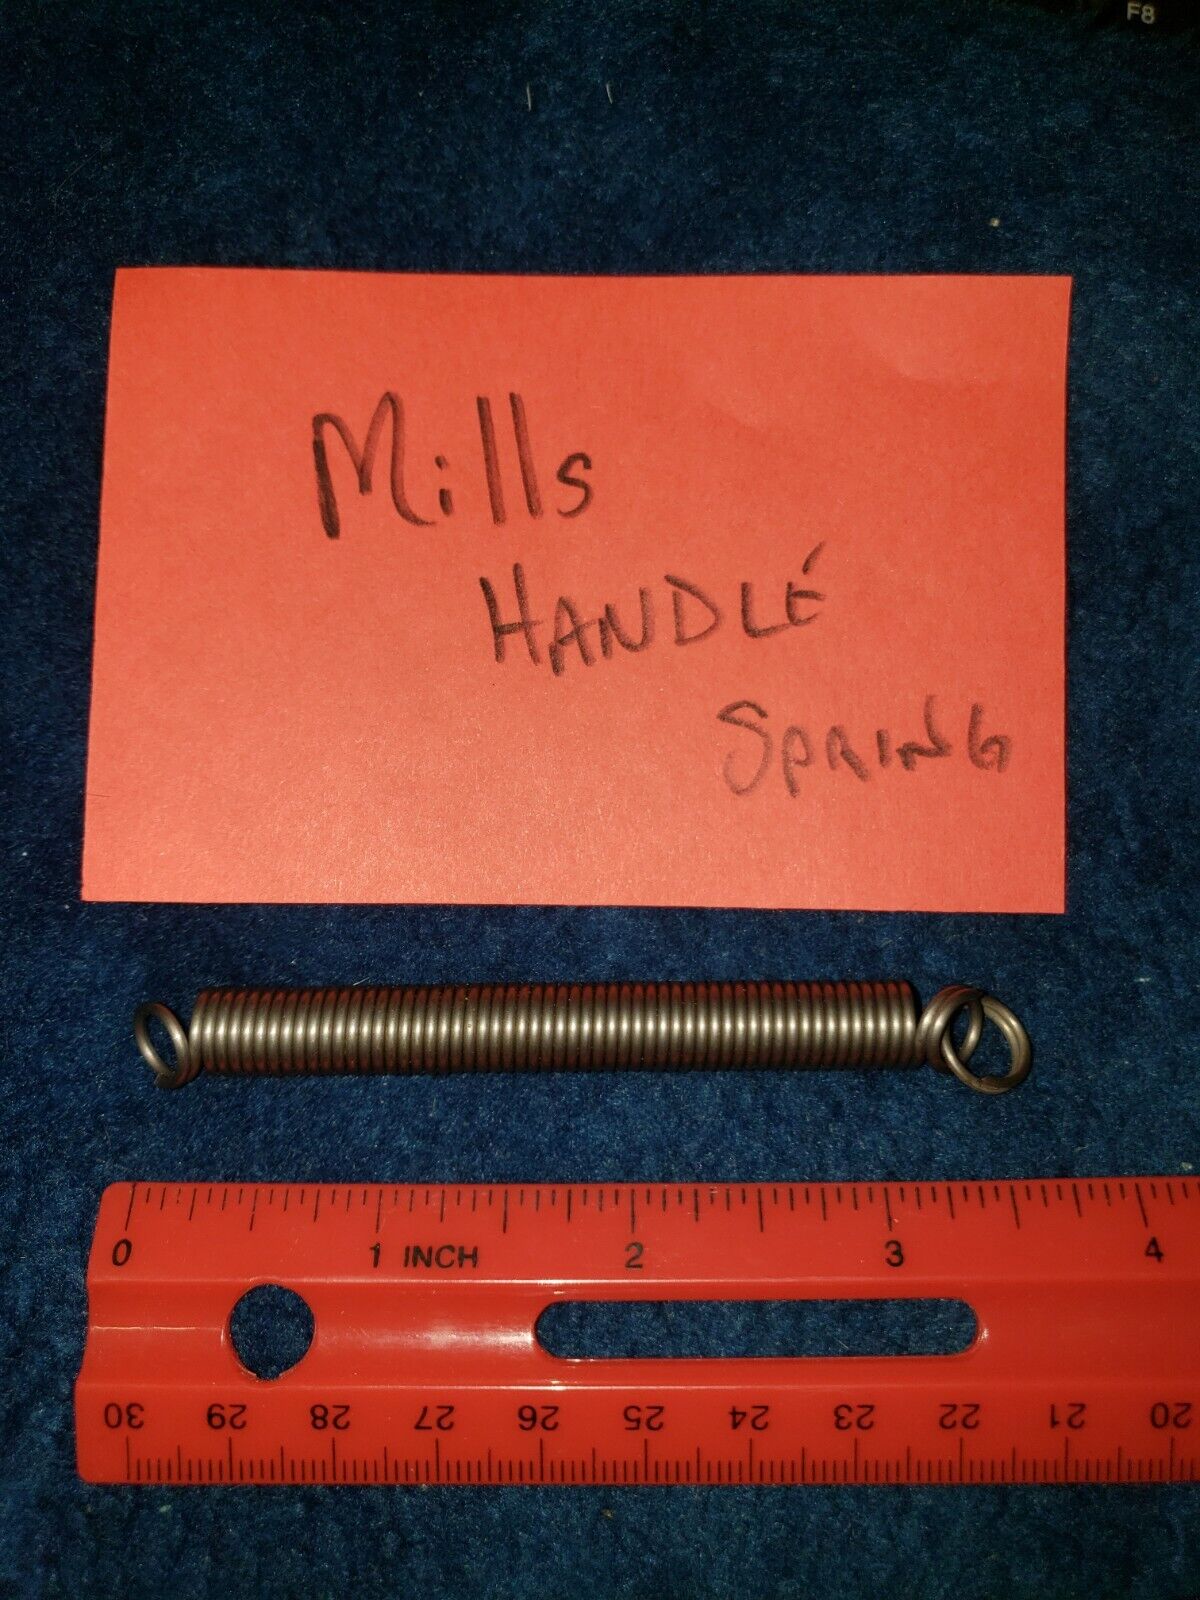 MILLS REPLACEMENT HANDLE SPRING ANTIQUE SLOT MACHINE MADE IN THE U.S.A.